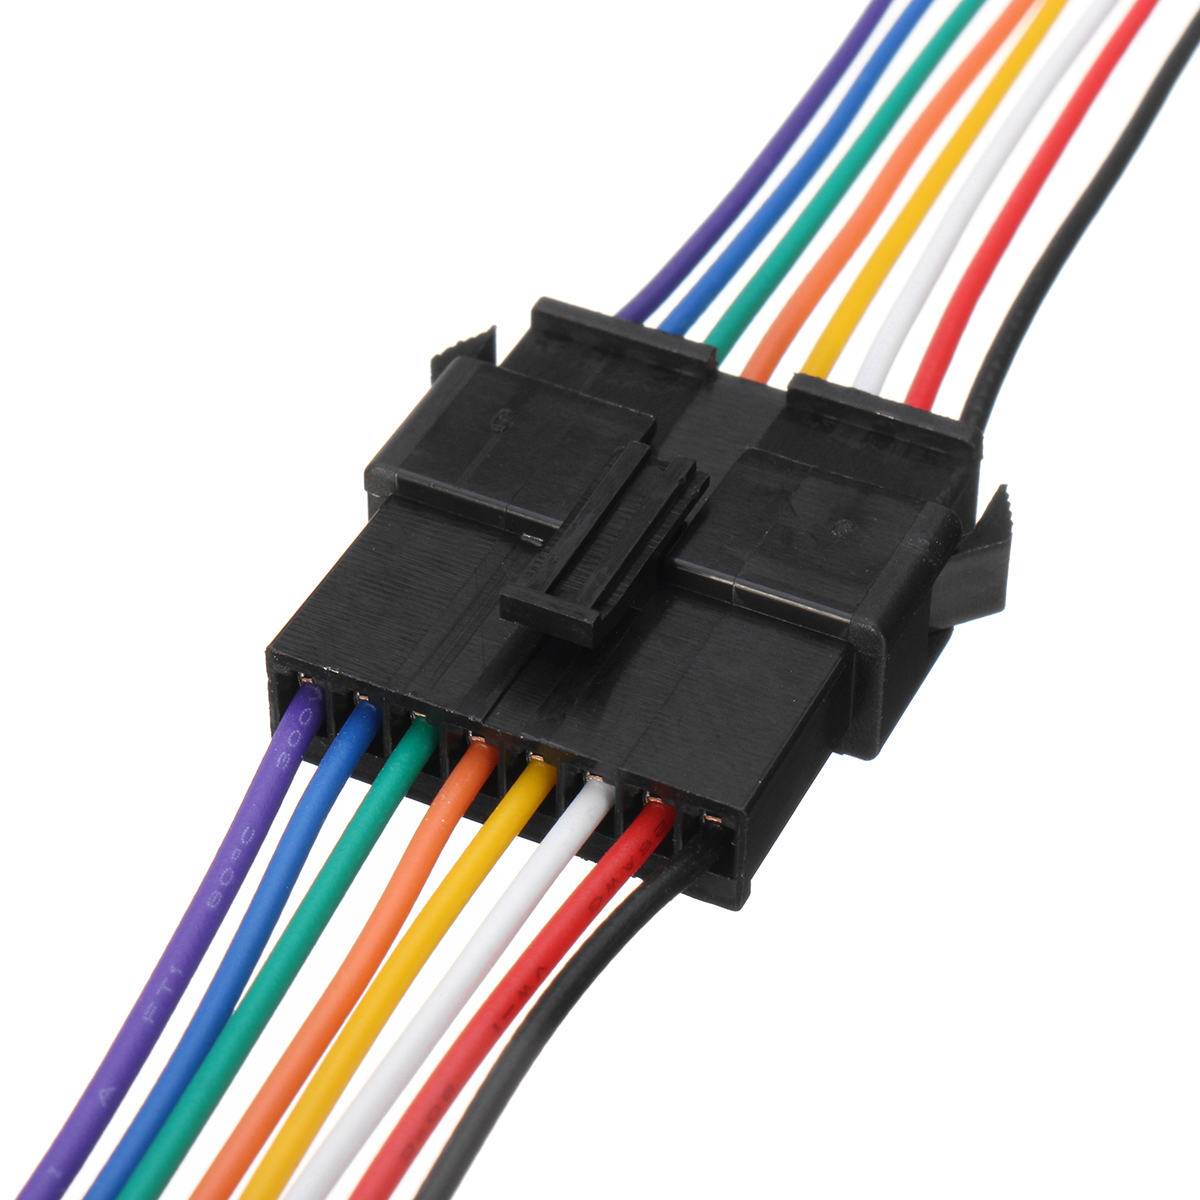 10-Set-Jst-25mm-SM-8-Pin-Male--Female-Connector-Plug-With-Wire-Cable-300mm-1170148-3